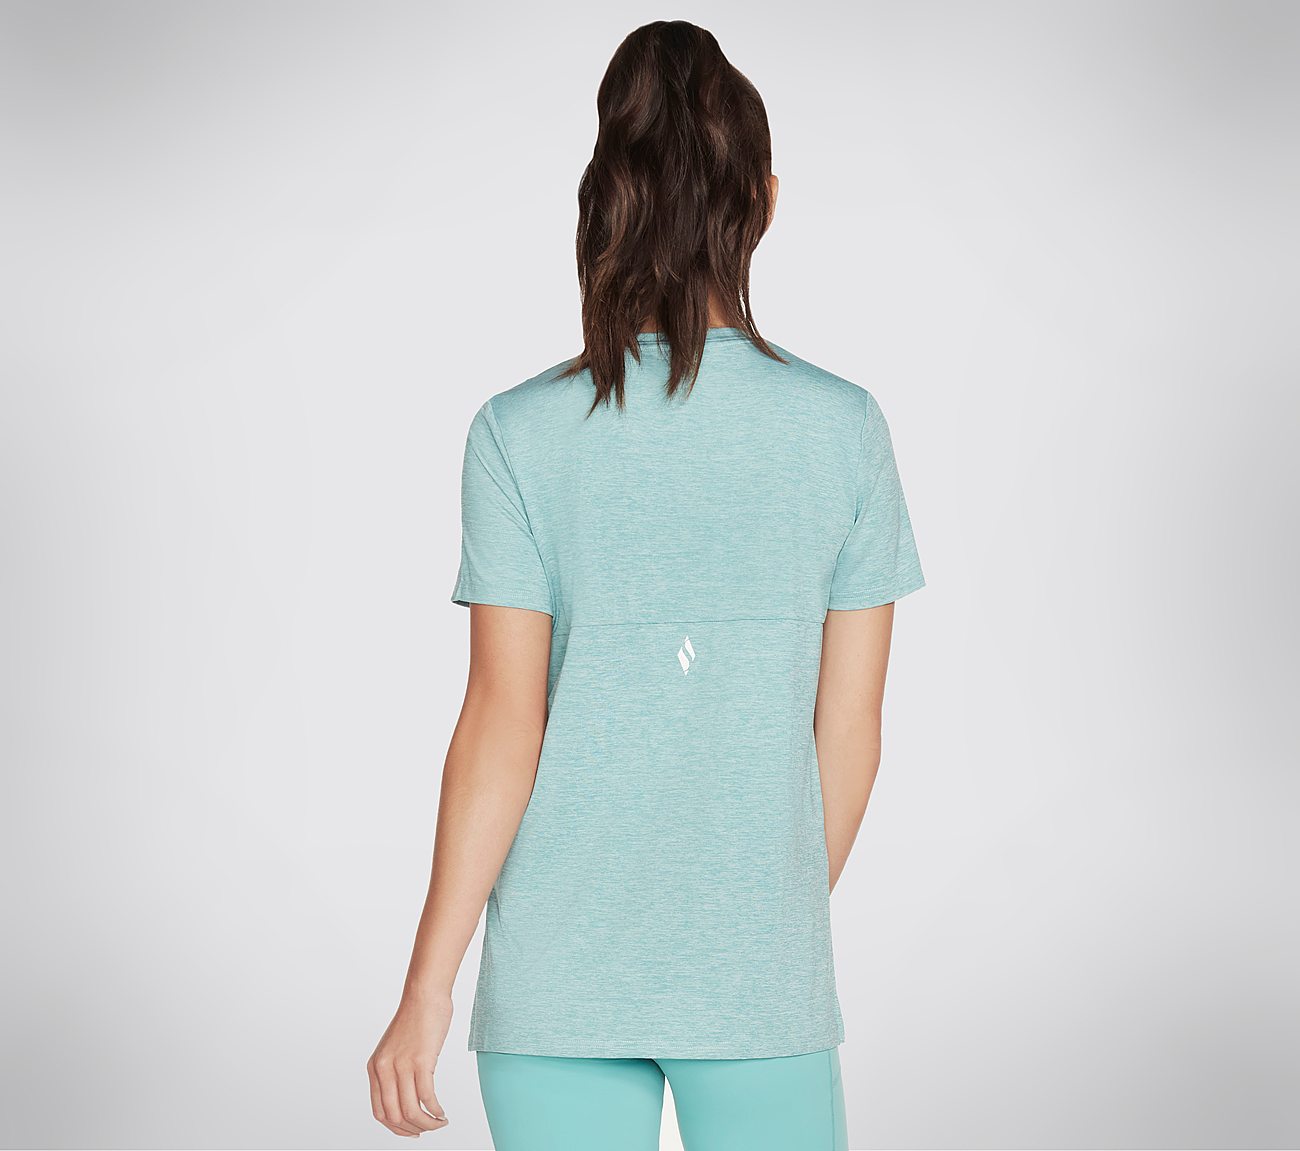 DIAMOND BLISSFUL TEE, TURQUOISE Apparels Top View